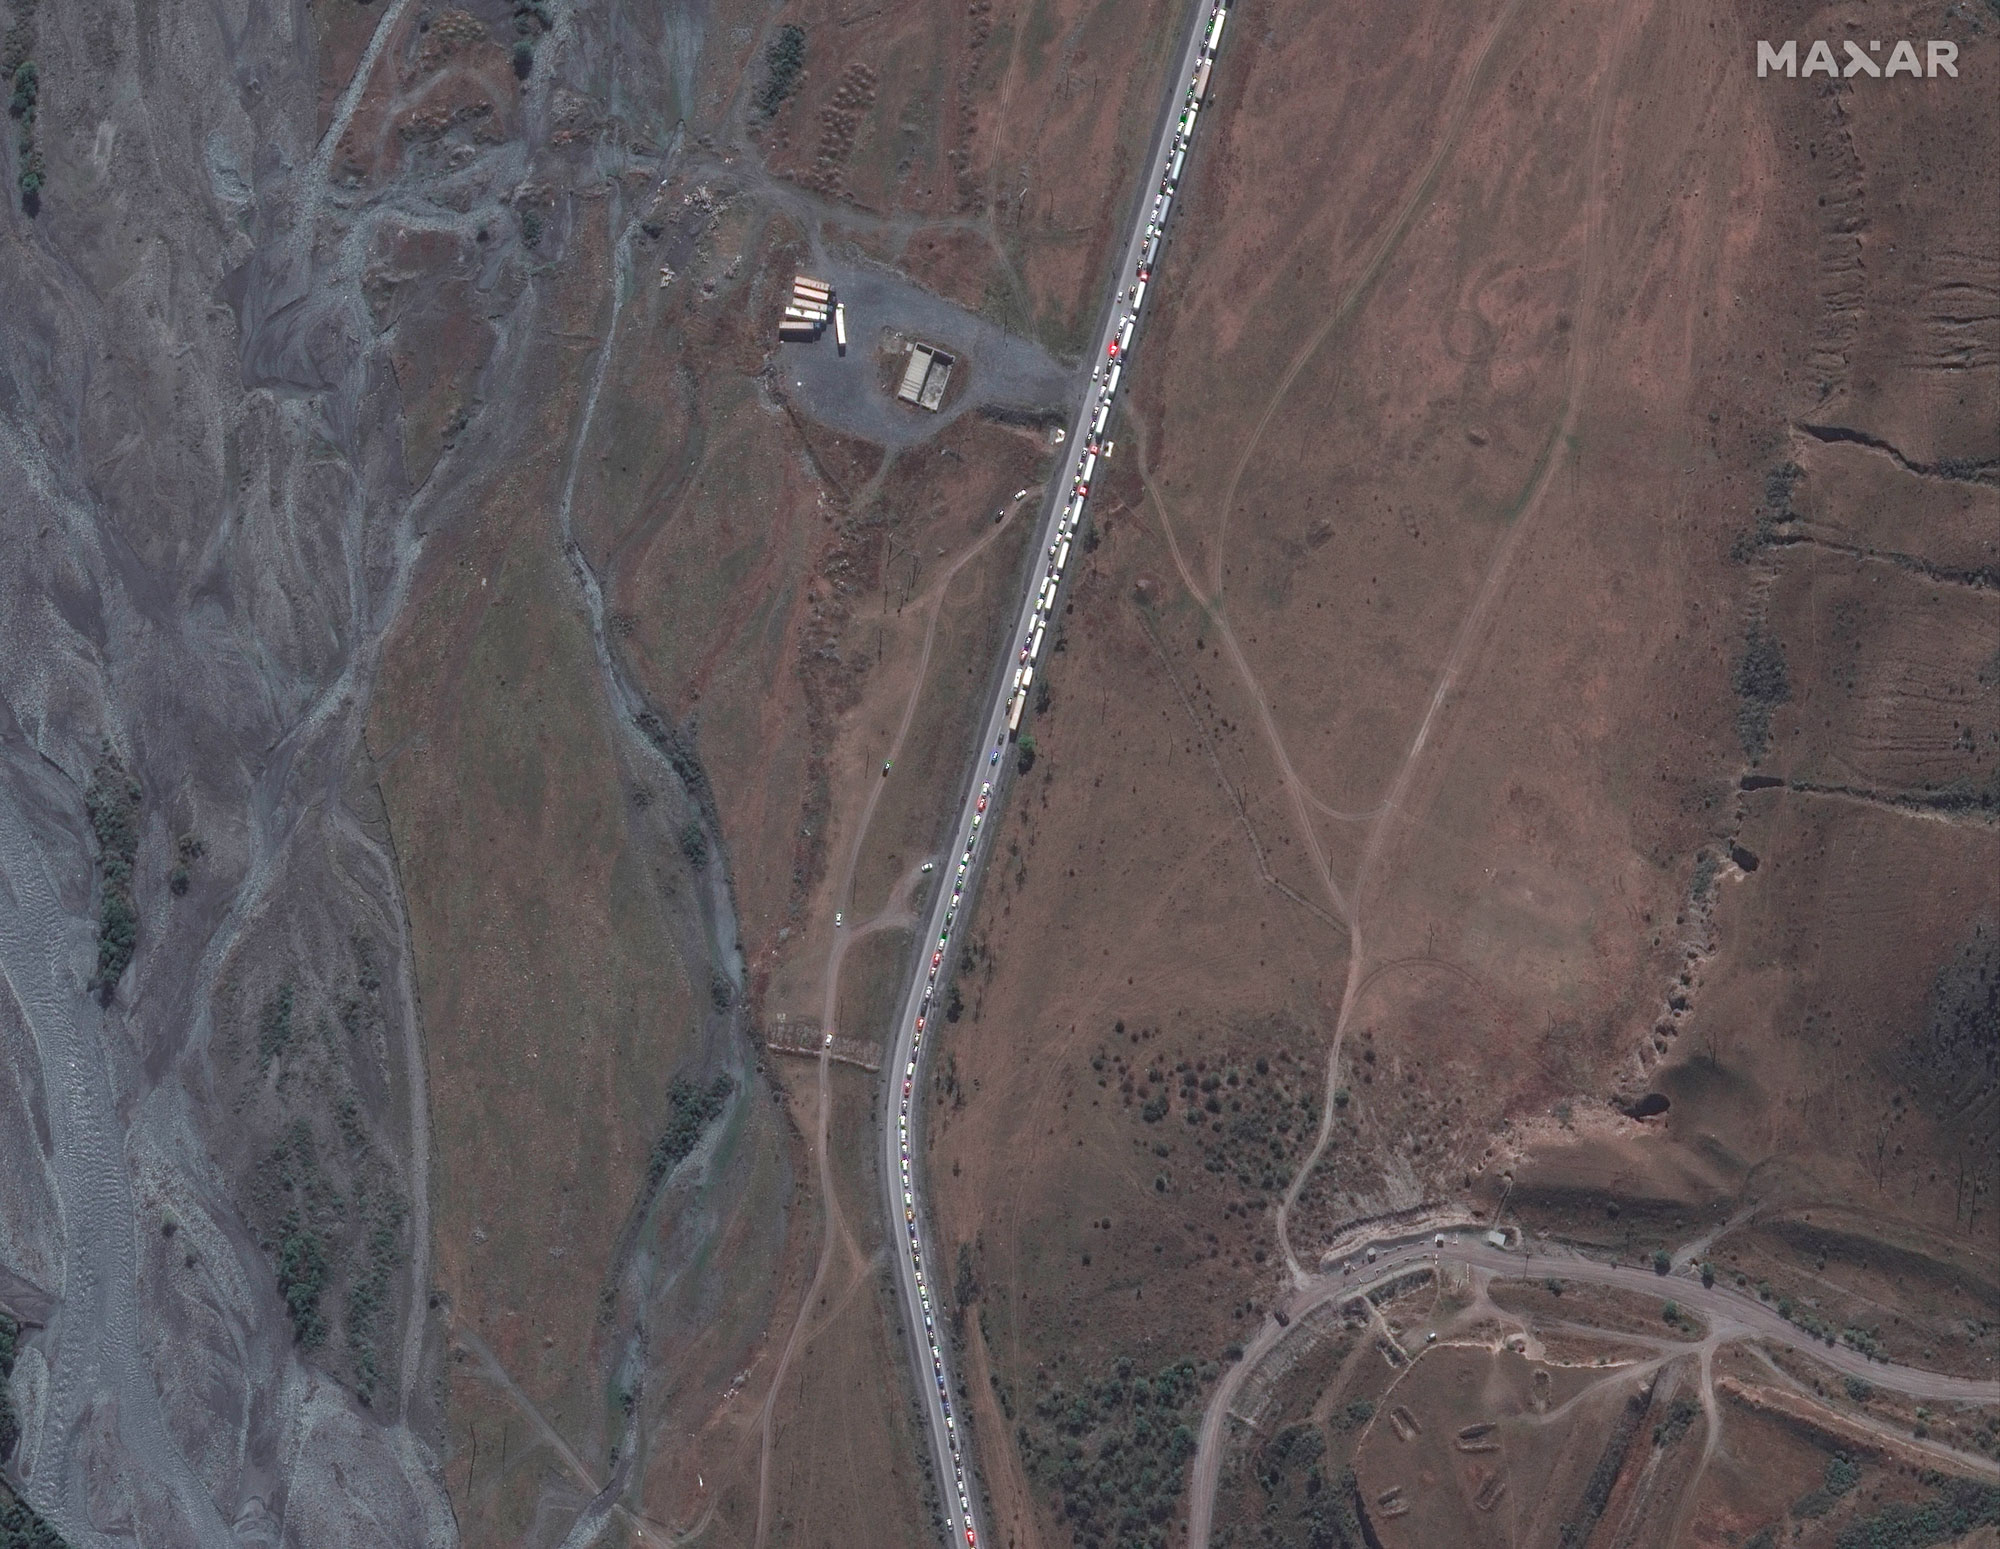 This satellite image provided by Maxar Technologies shows an overview of the traffic jam near the Russia border with Georgia on Sunday.